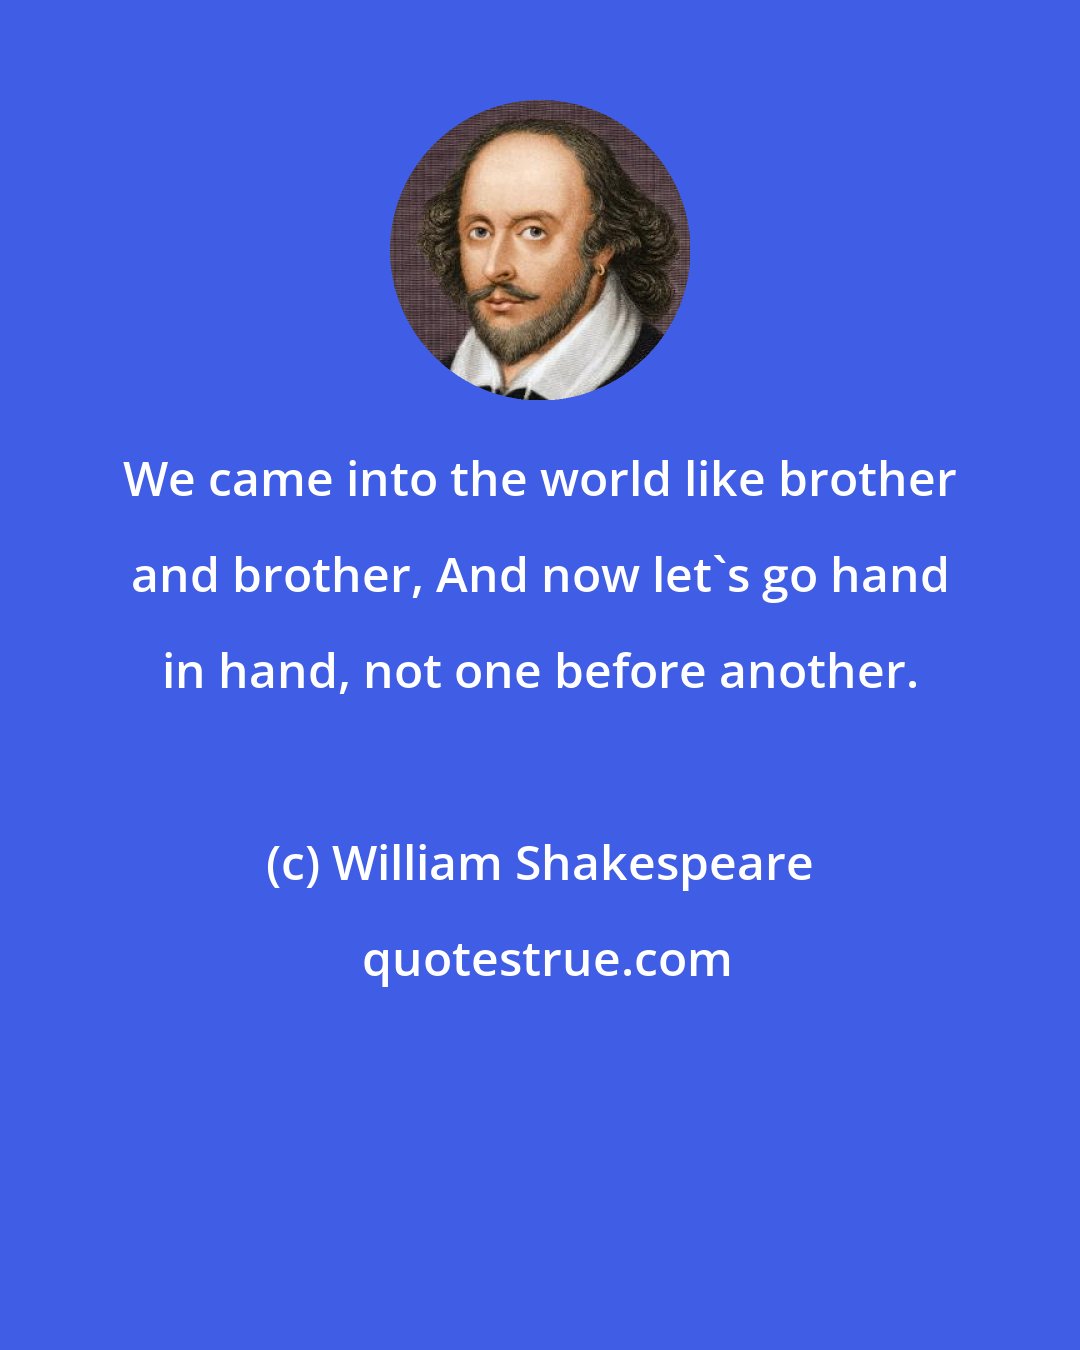 William Shakespeare: We came into the world like brother and brother, And now let's go hand in hand, not one before another.